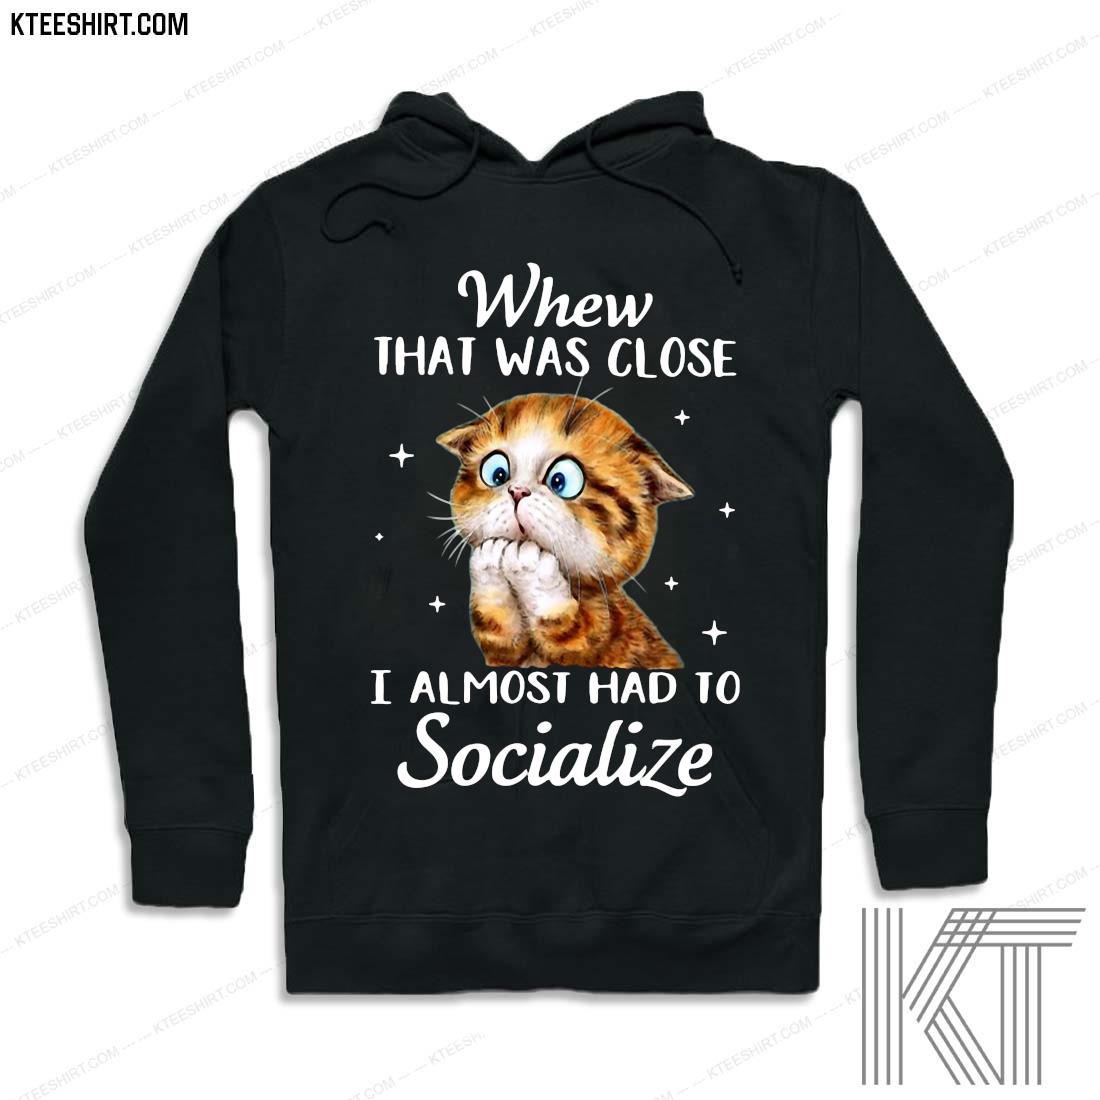 Doryti Whew That was Close Almost had to Socialize Women Sweatshirt tee 